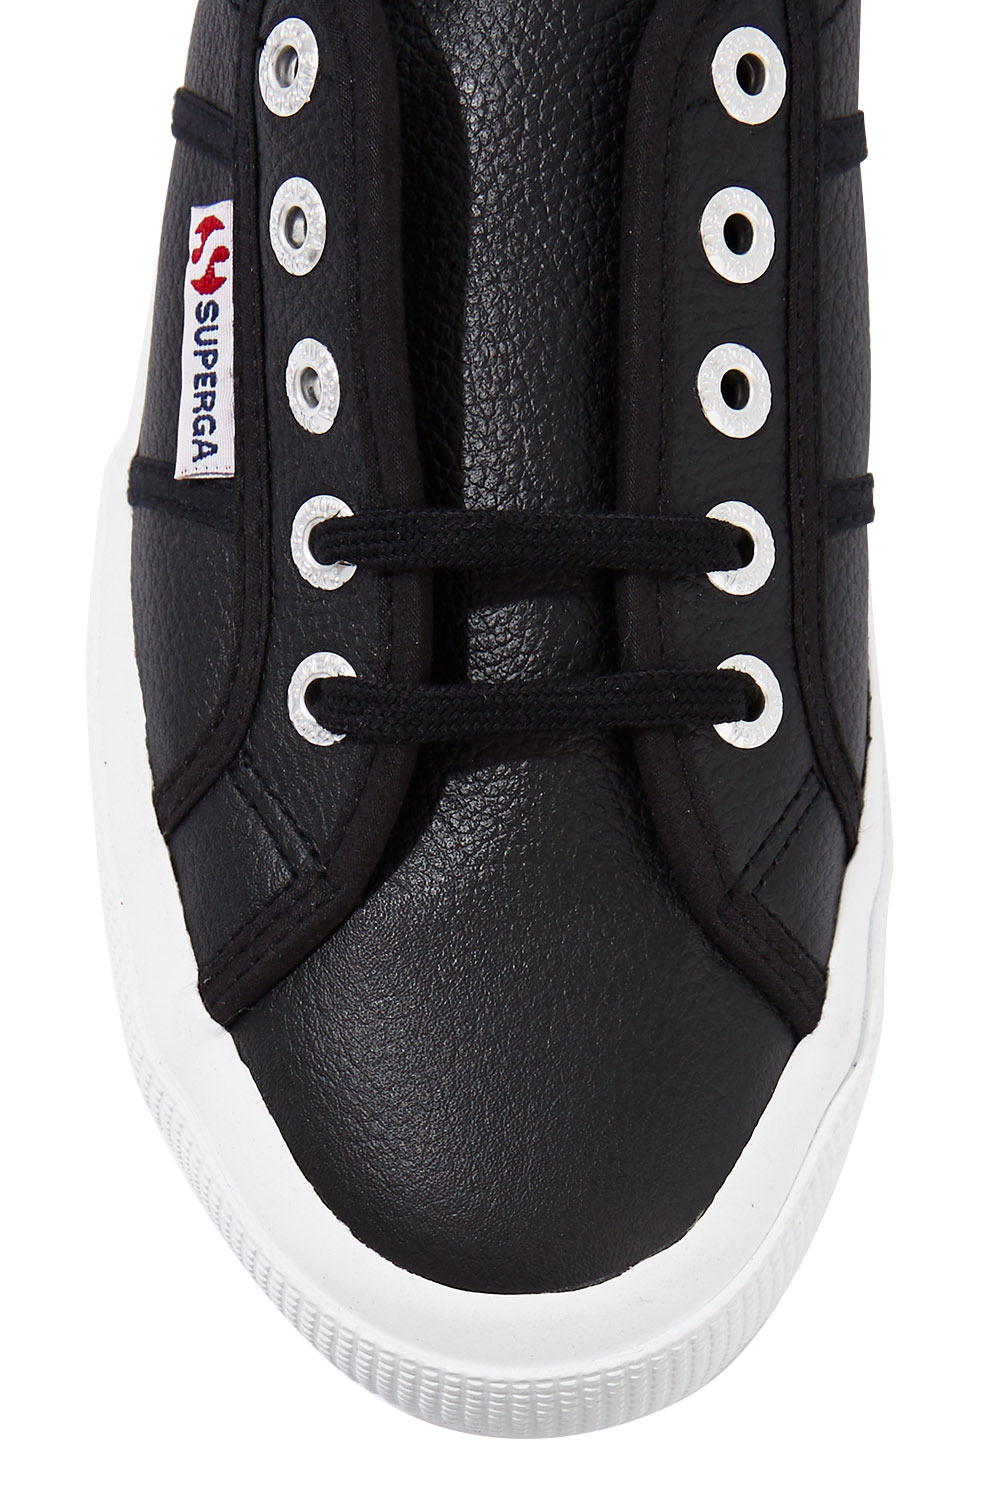 superga womens leather sneakers